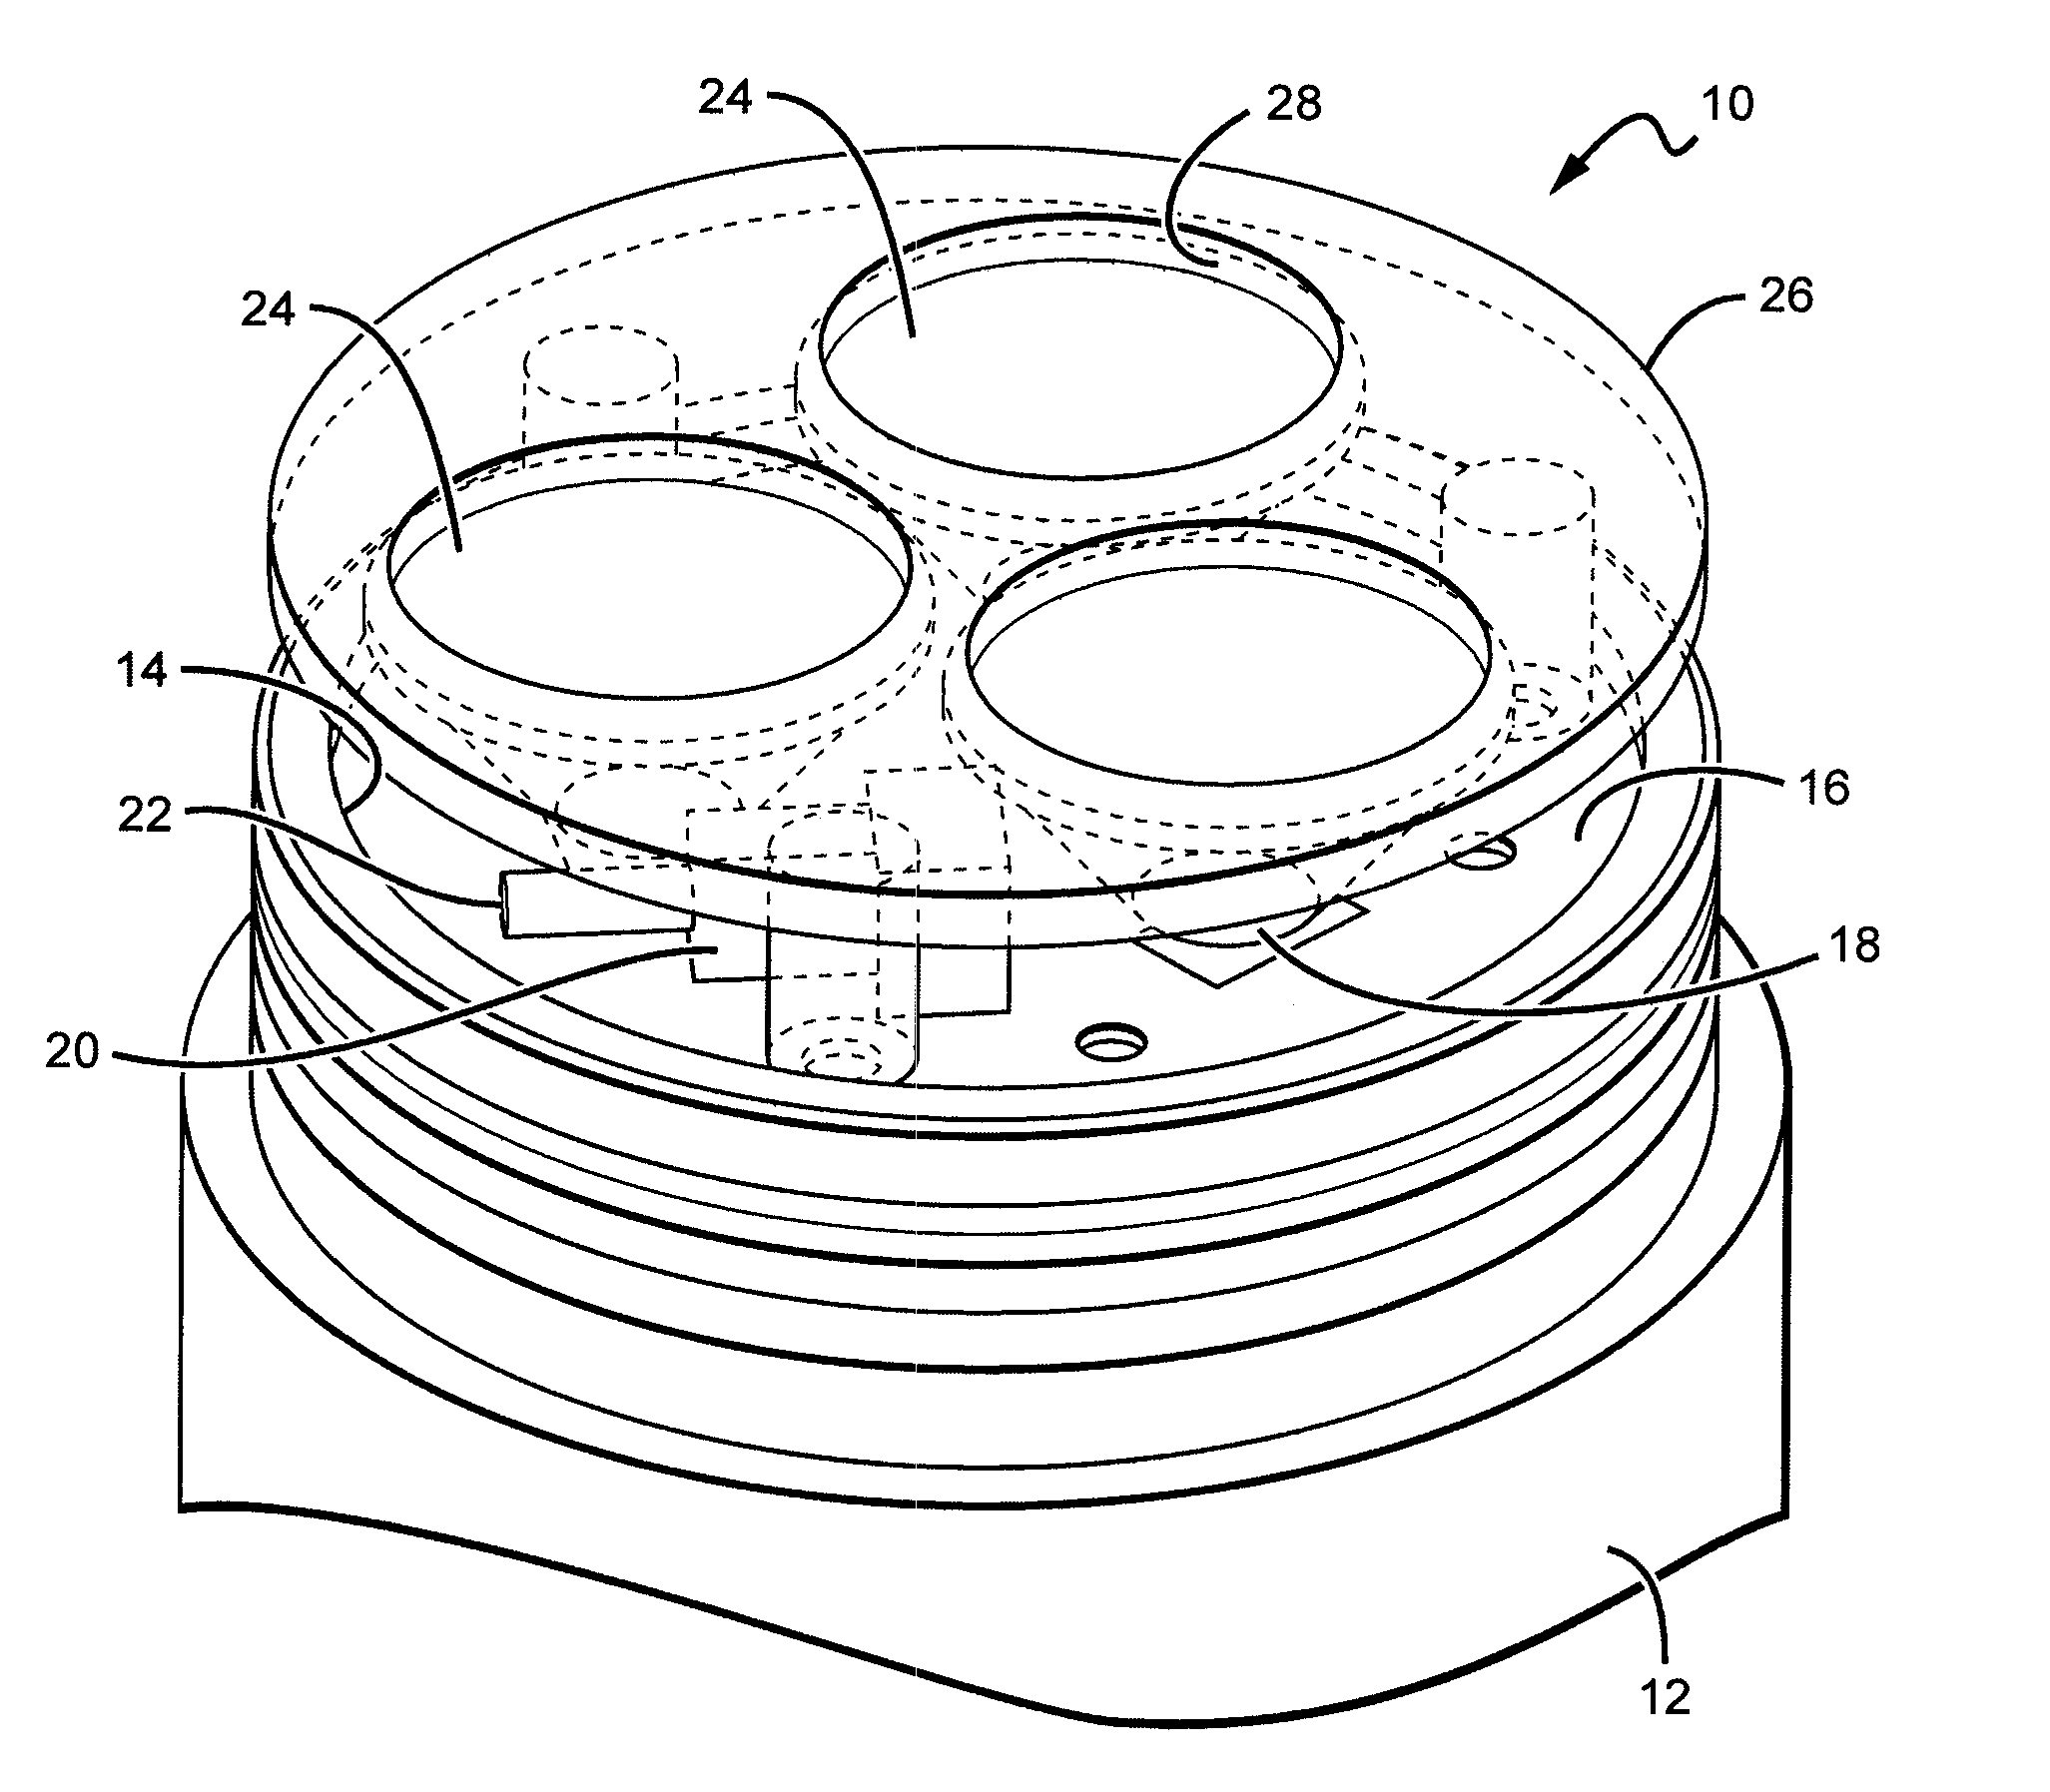 Dimming apparatus for solid state lighting fixtures